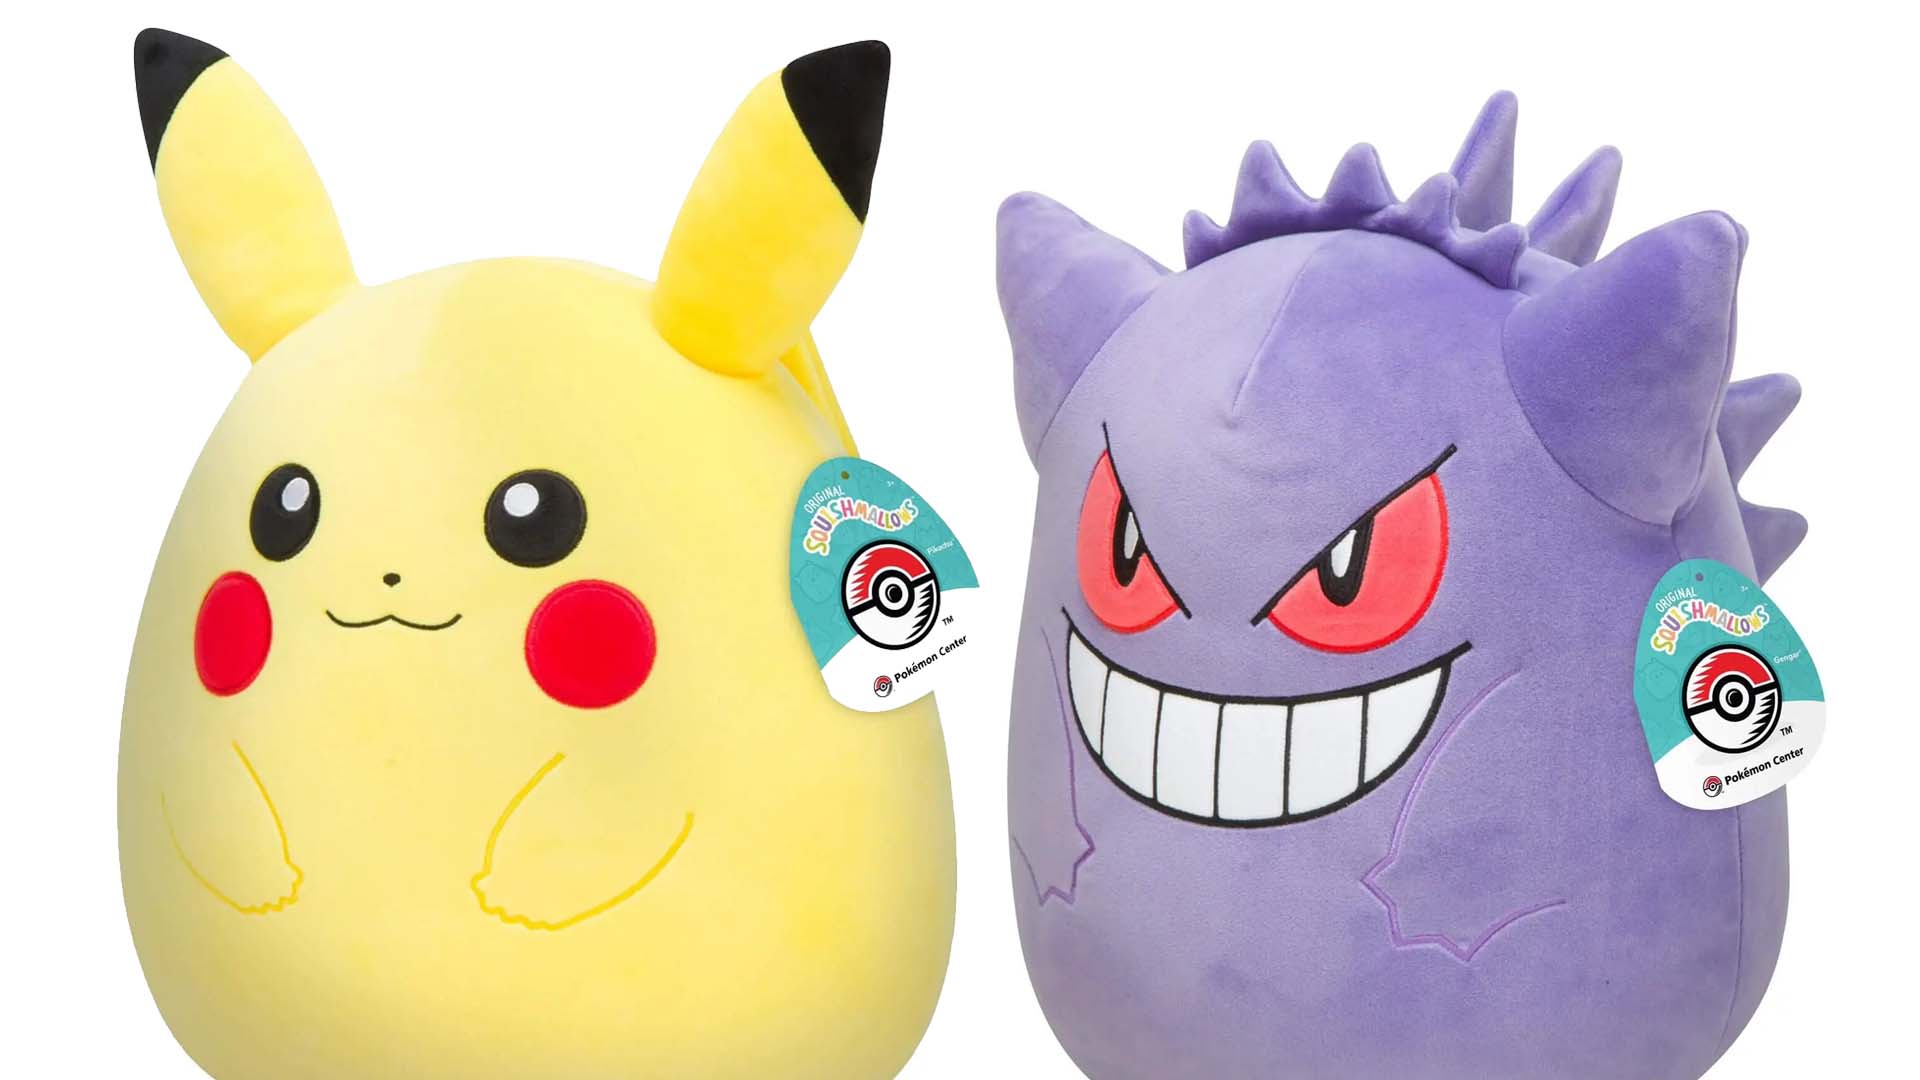 Pokémon Squishmallows make their official debut, on sale this fall